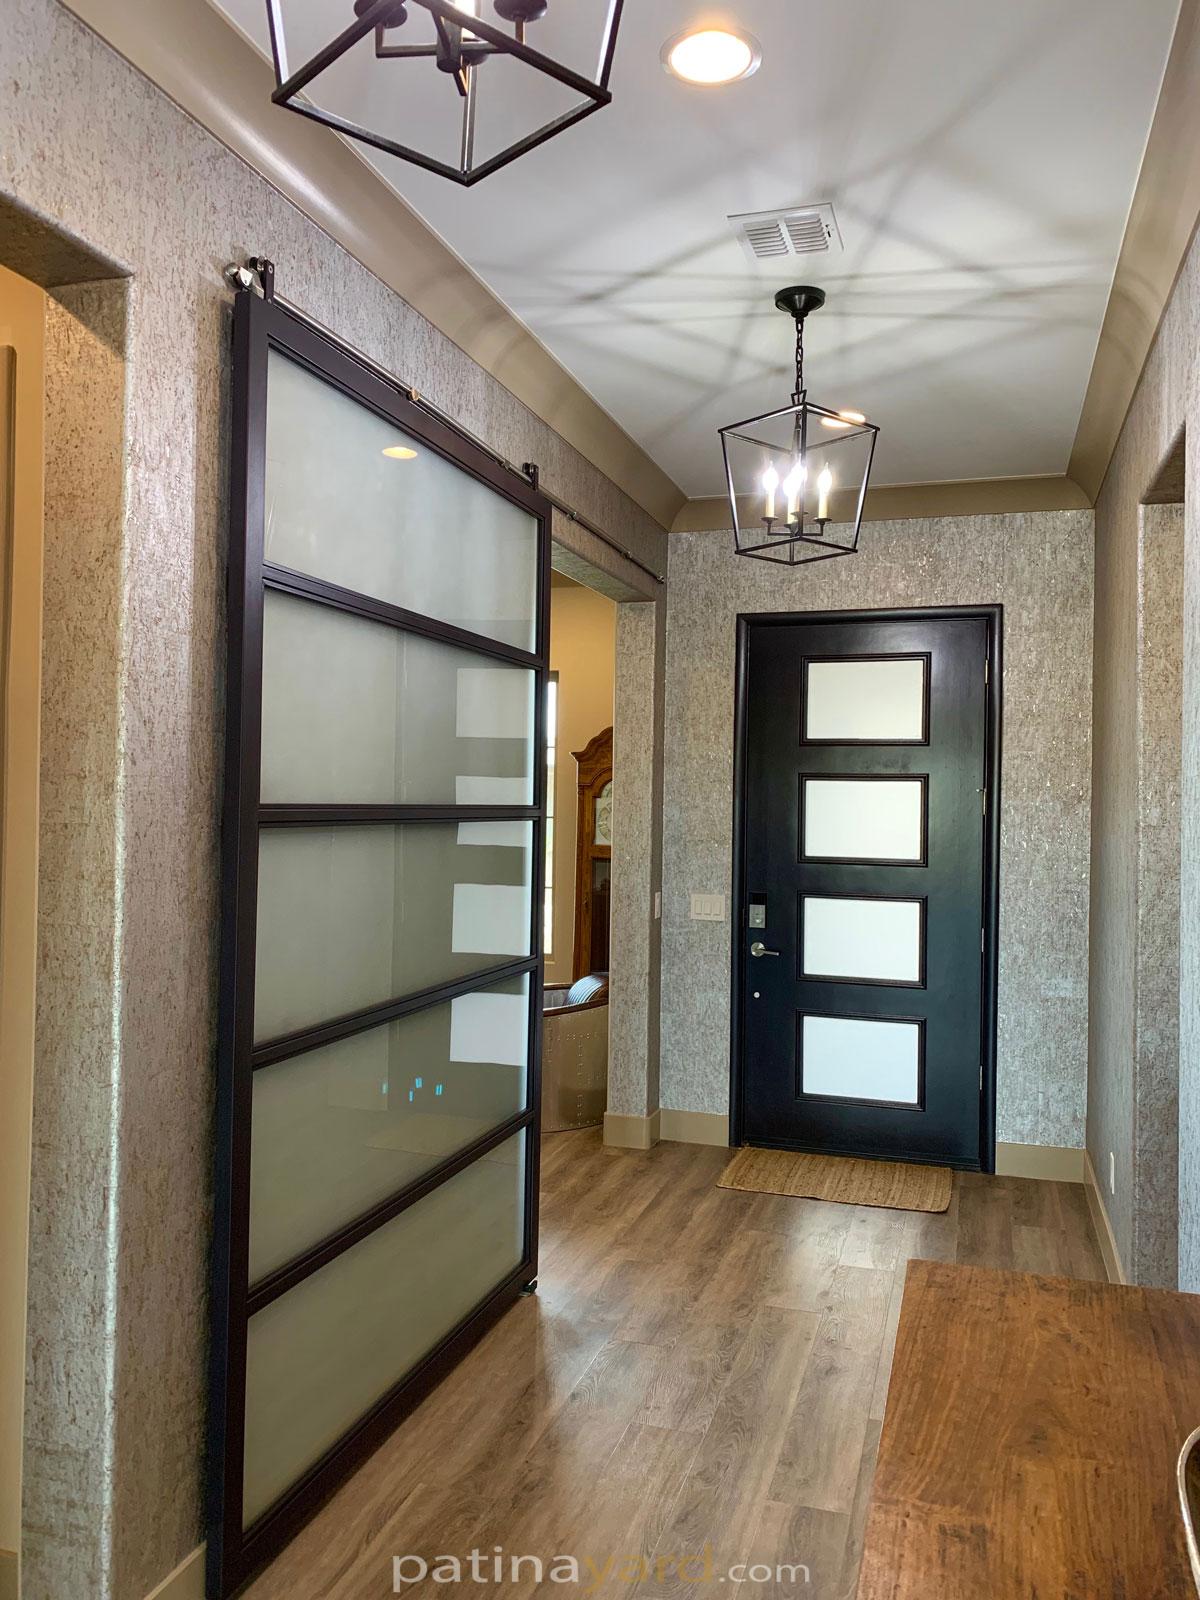 satin glass and metal barn door with stainless steel hardware